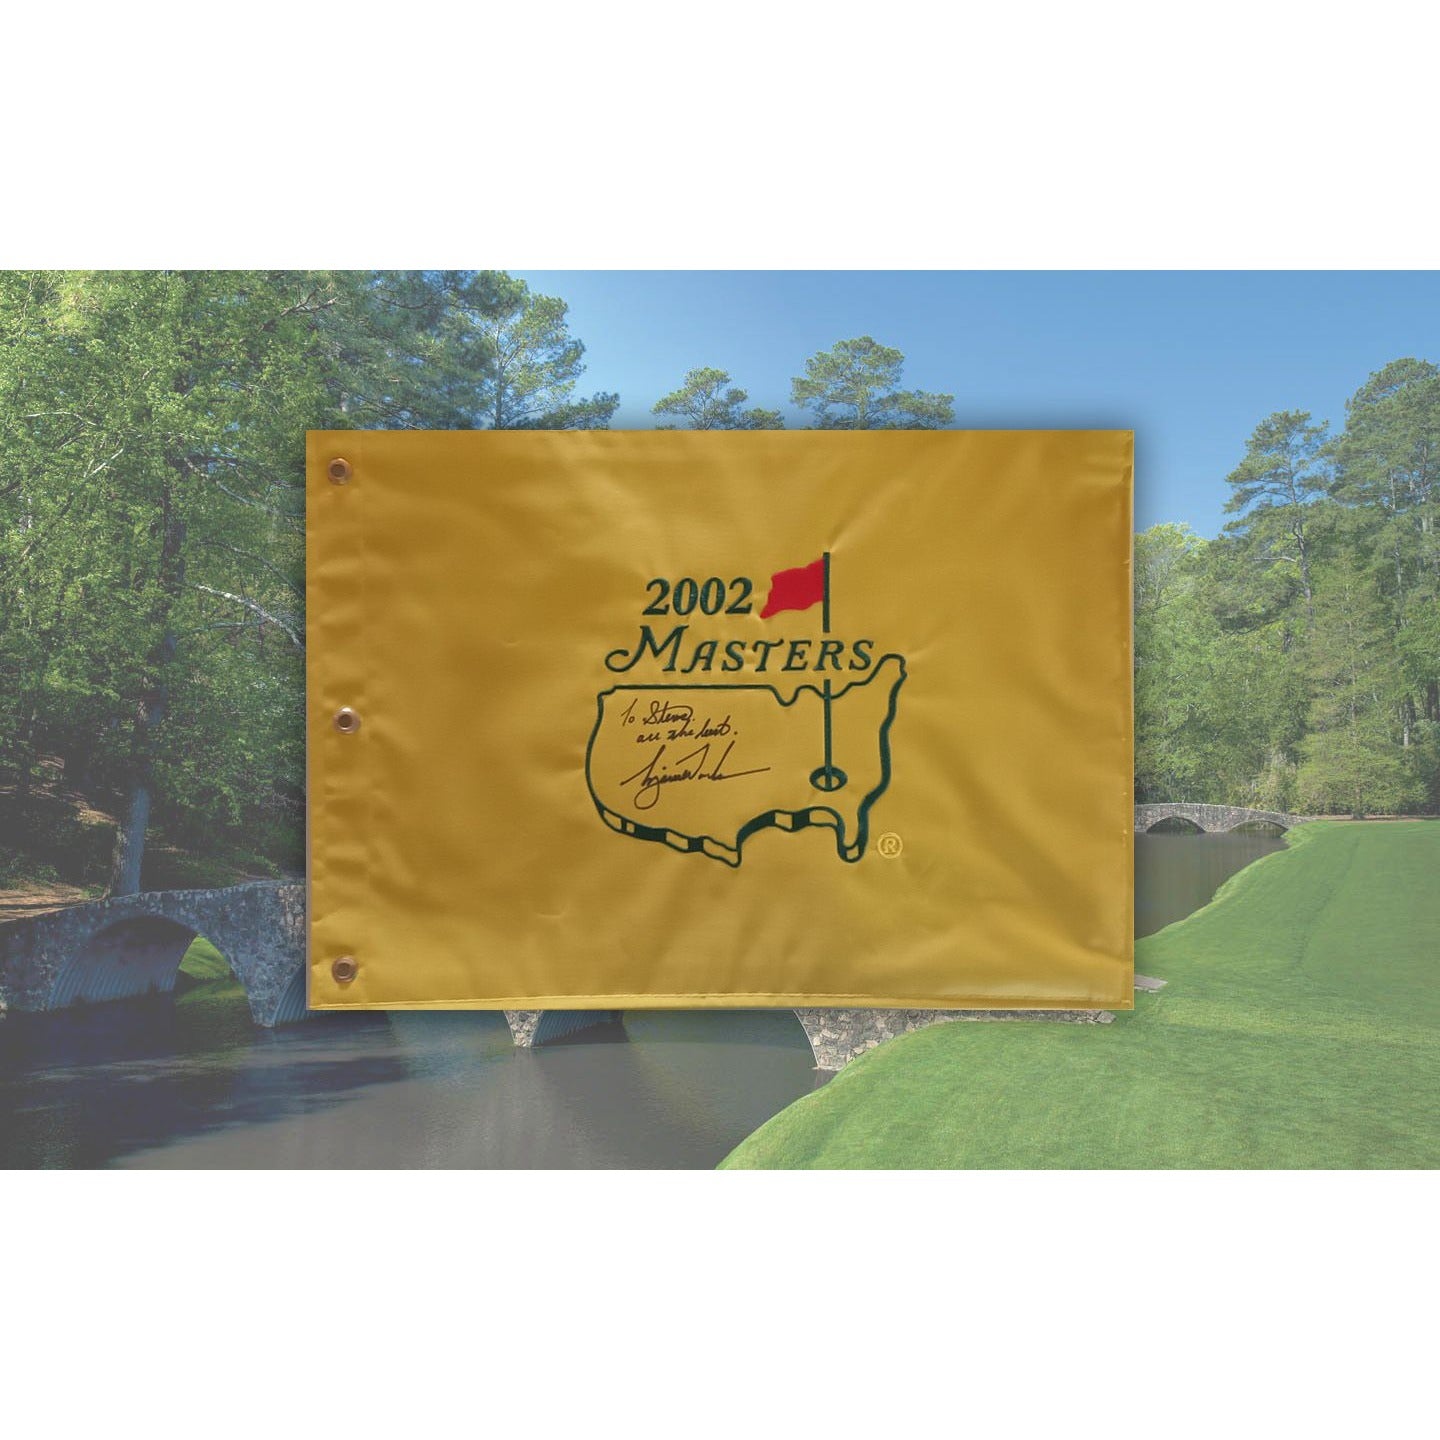 Tiger Woods "To Steve all the best" 2002 Masters Golf pin flag signed with proof